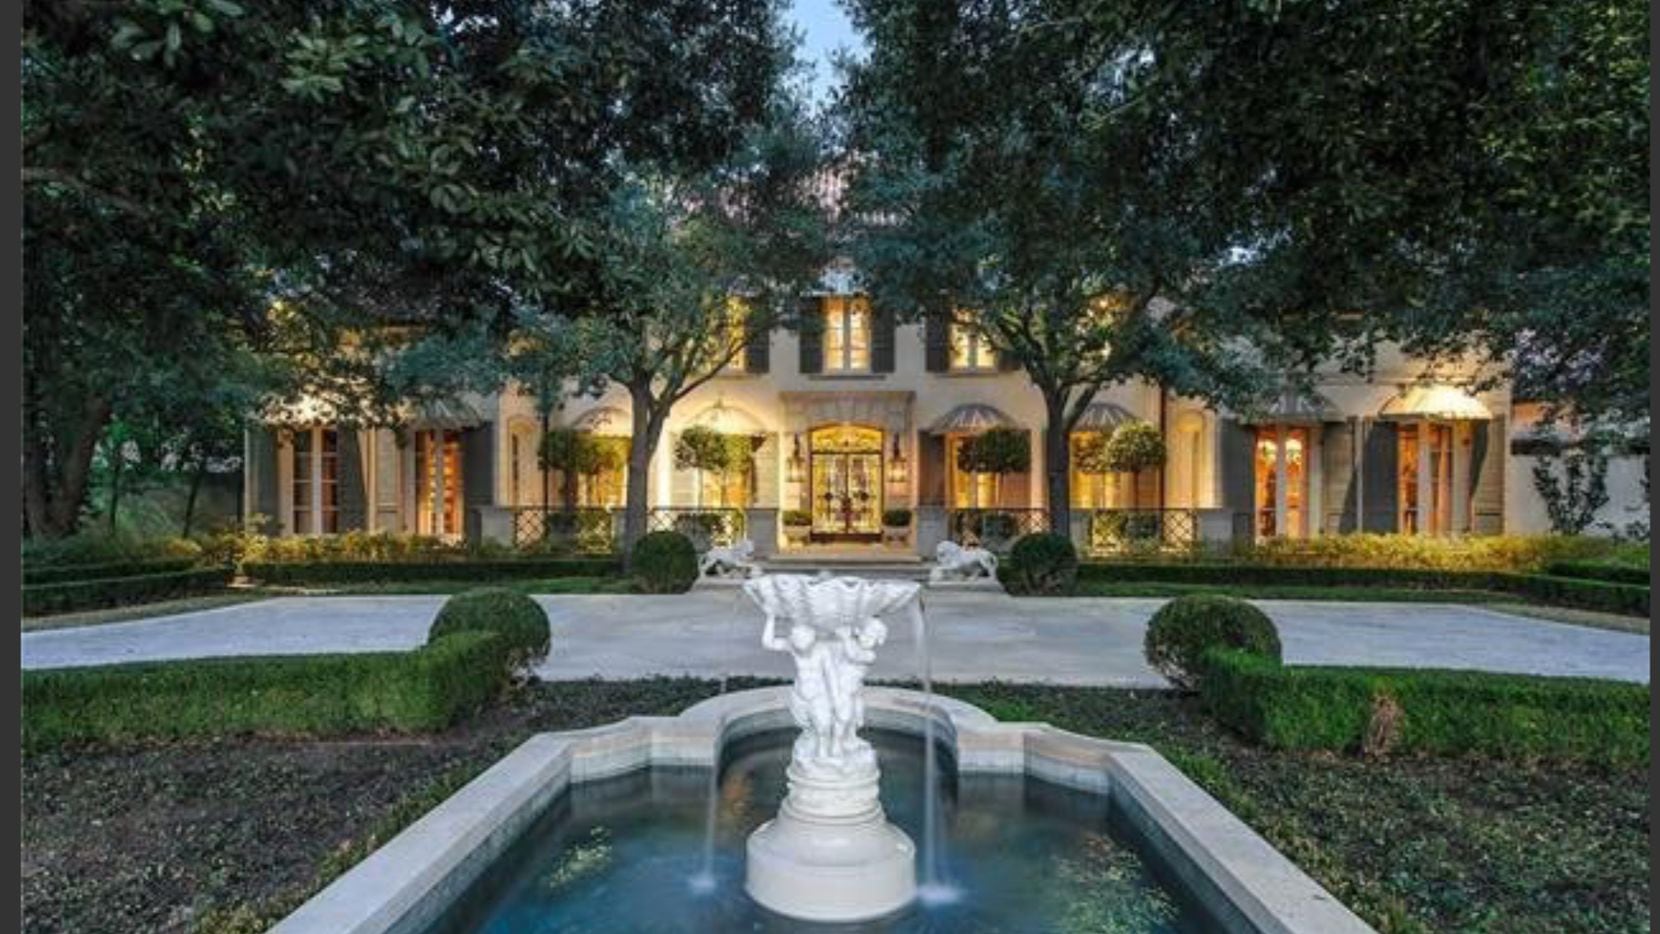 Oilman T. Boone Pickens' Preston Hollow mansion is for sale for just under $6 million.